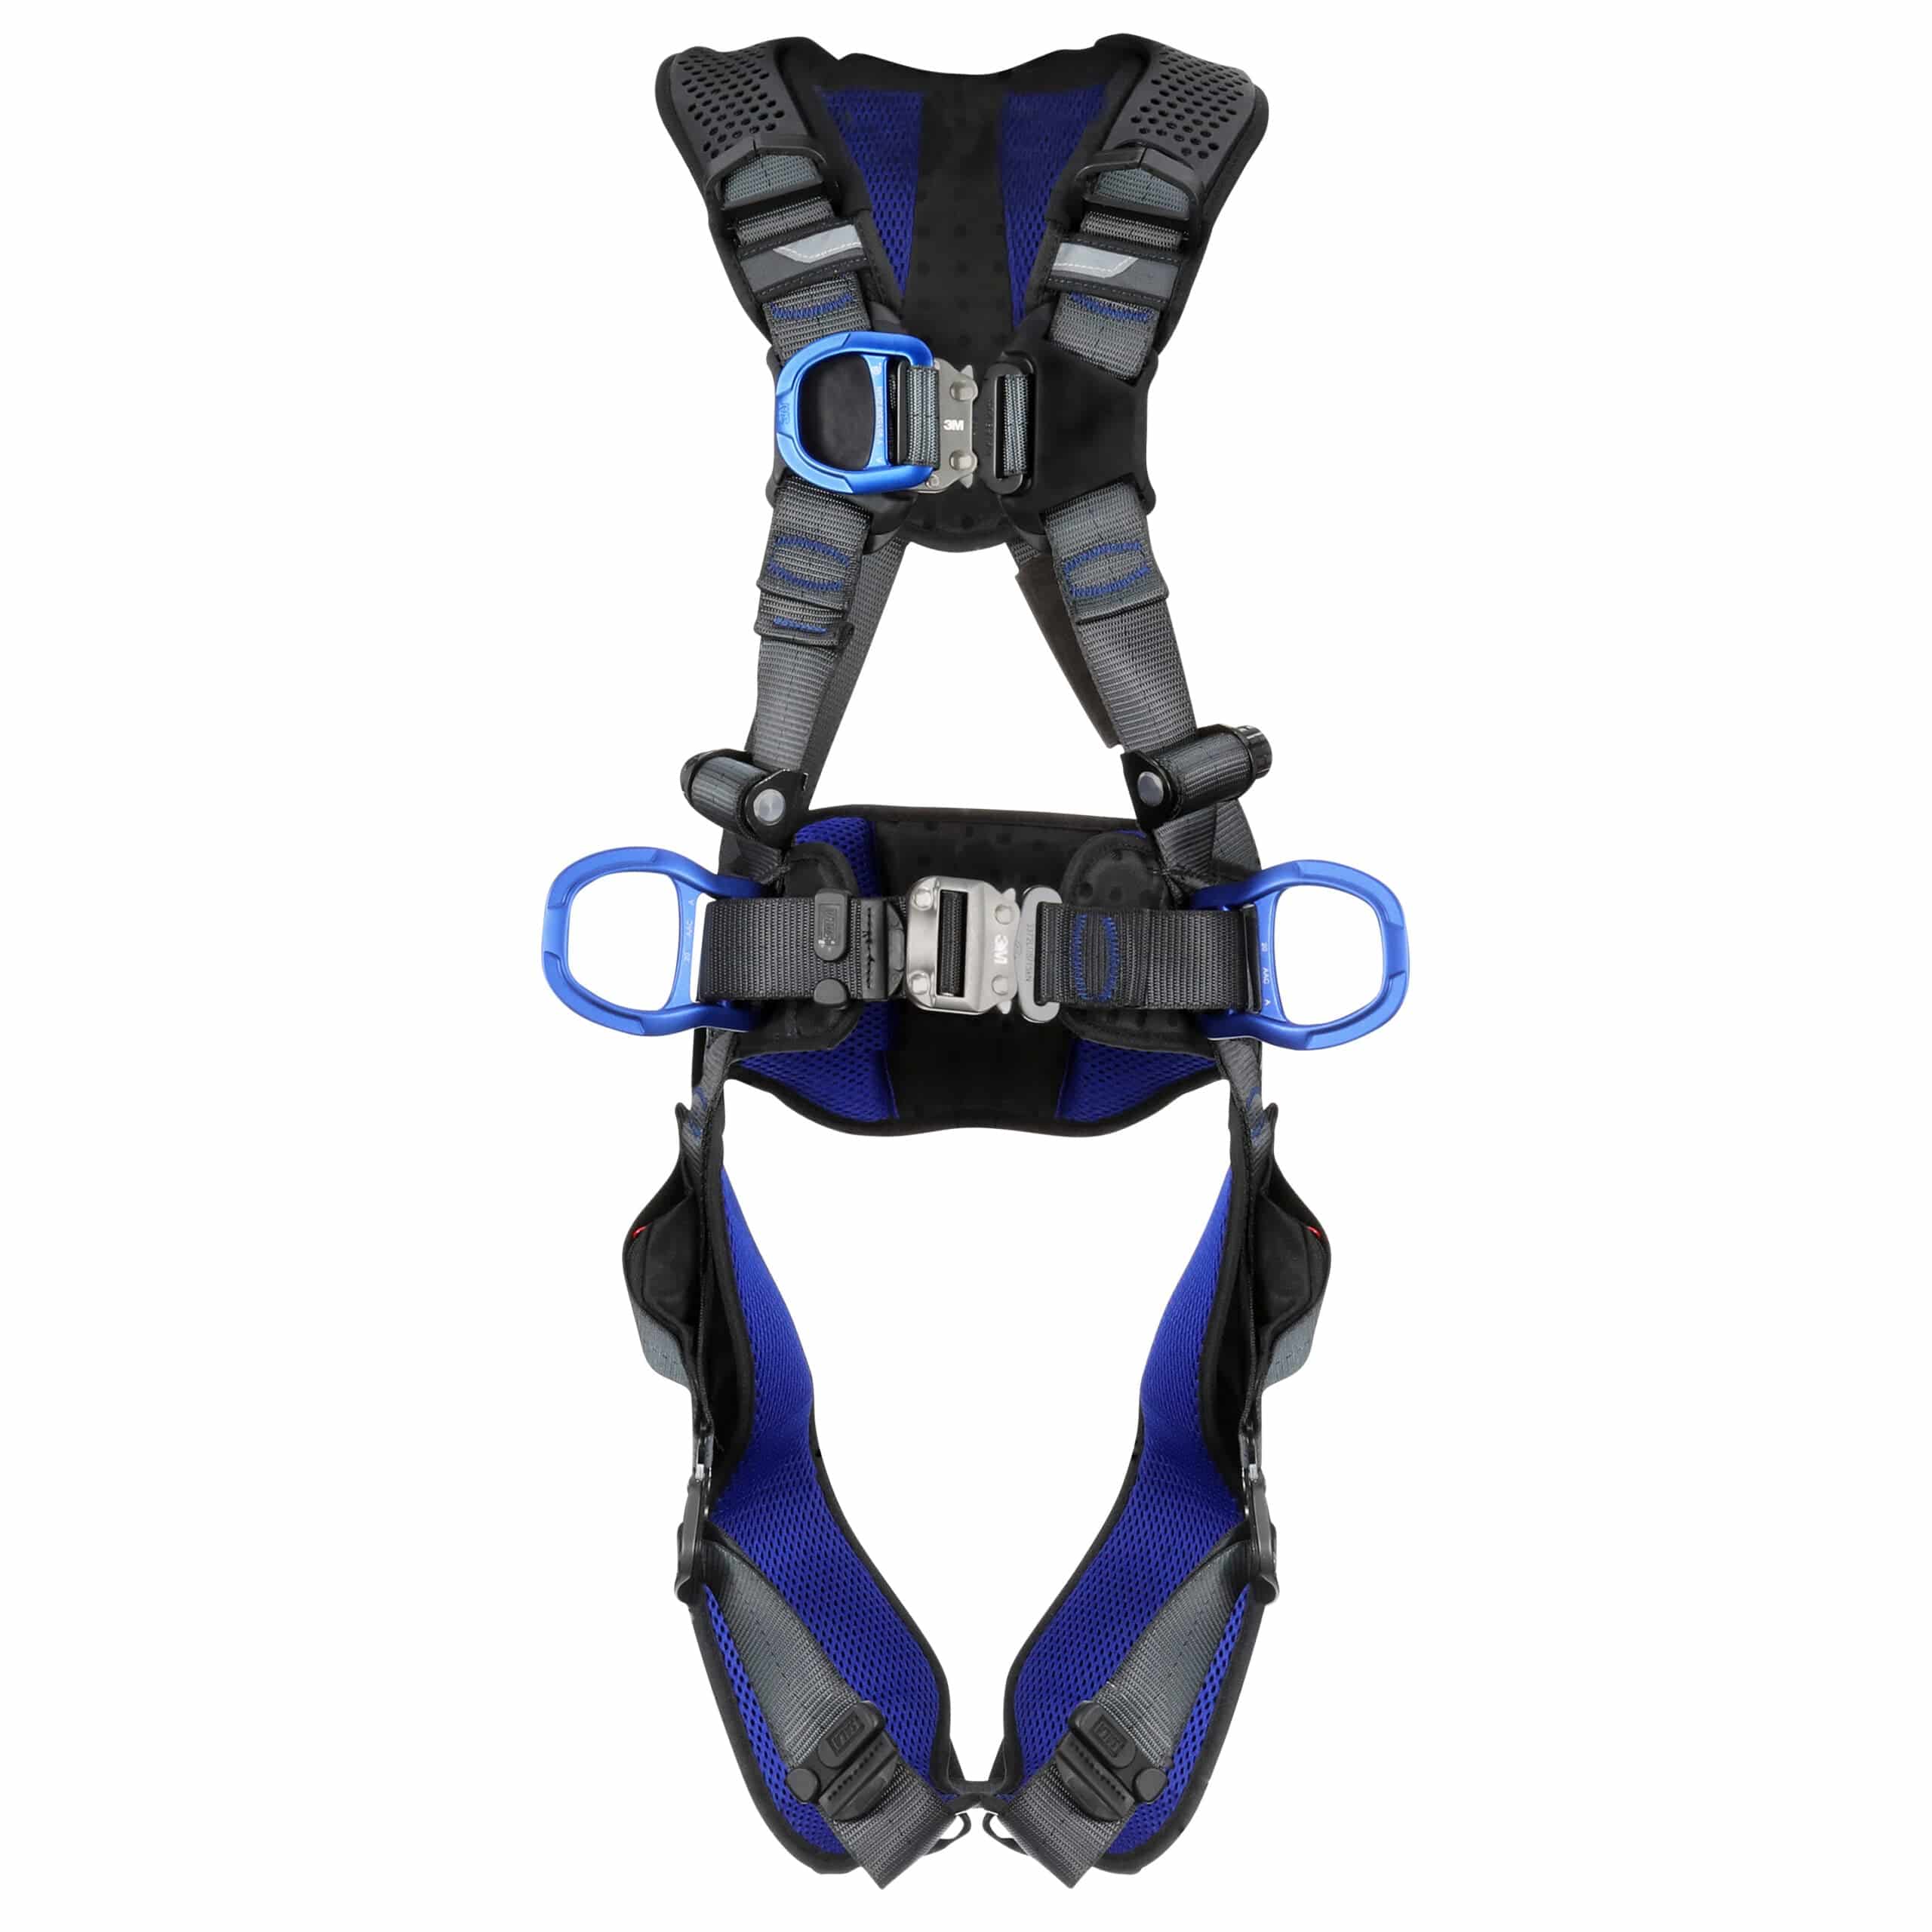 3M DBI SALA ExoFit XE200 Quick Connect Comfort Positioning Safety Harness - SecureHeights